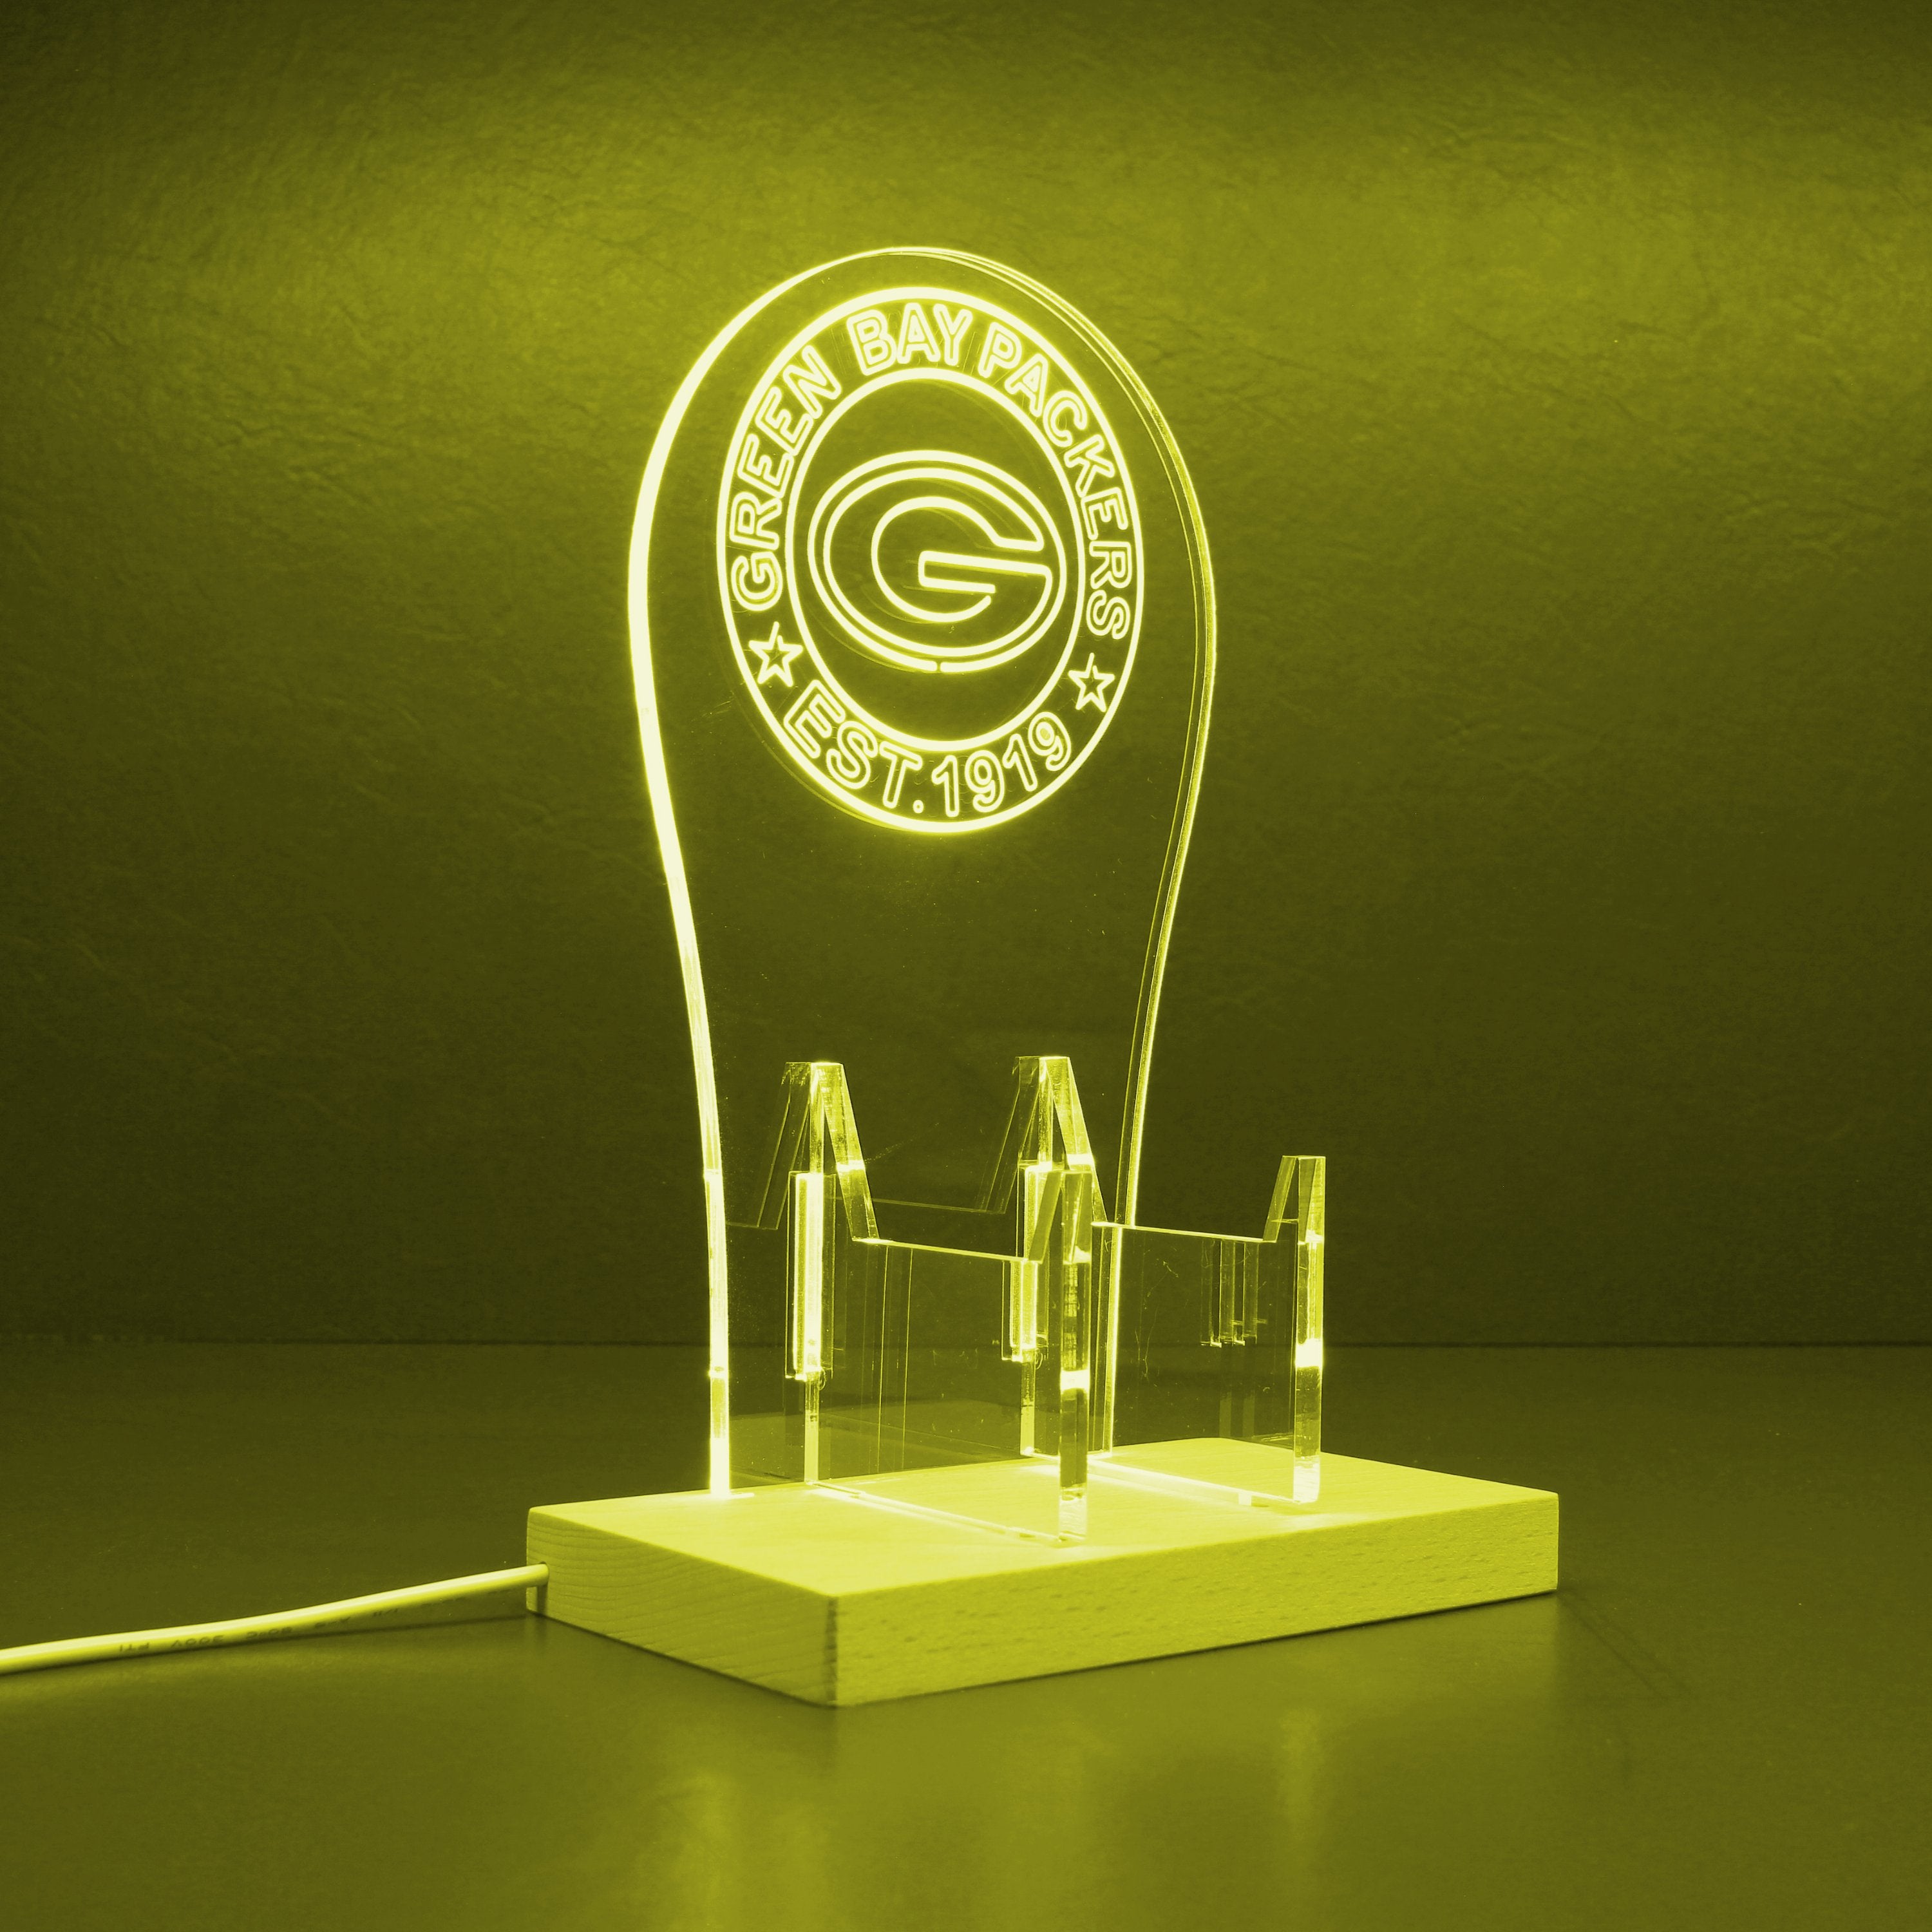 Custom Your NFL Sport Team Green Bay Packers Est.1919 RGB LED Gaming Headset Controller Stand